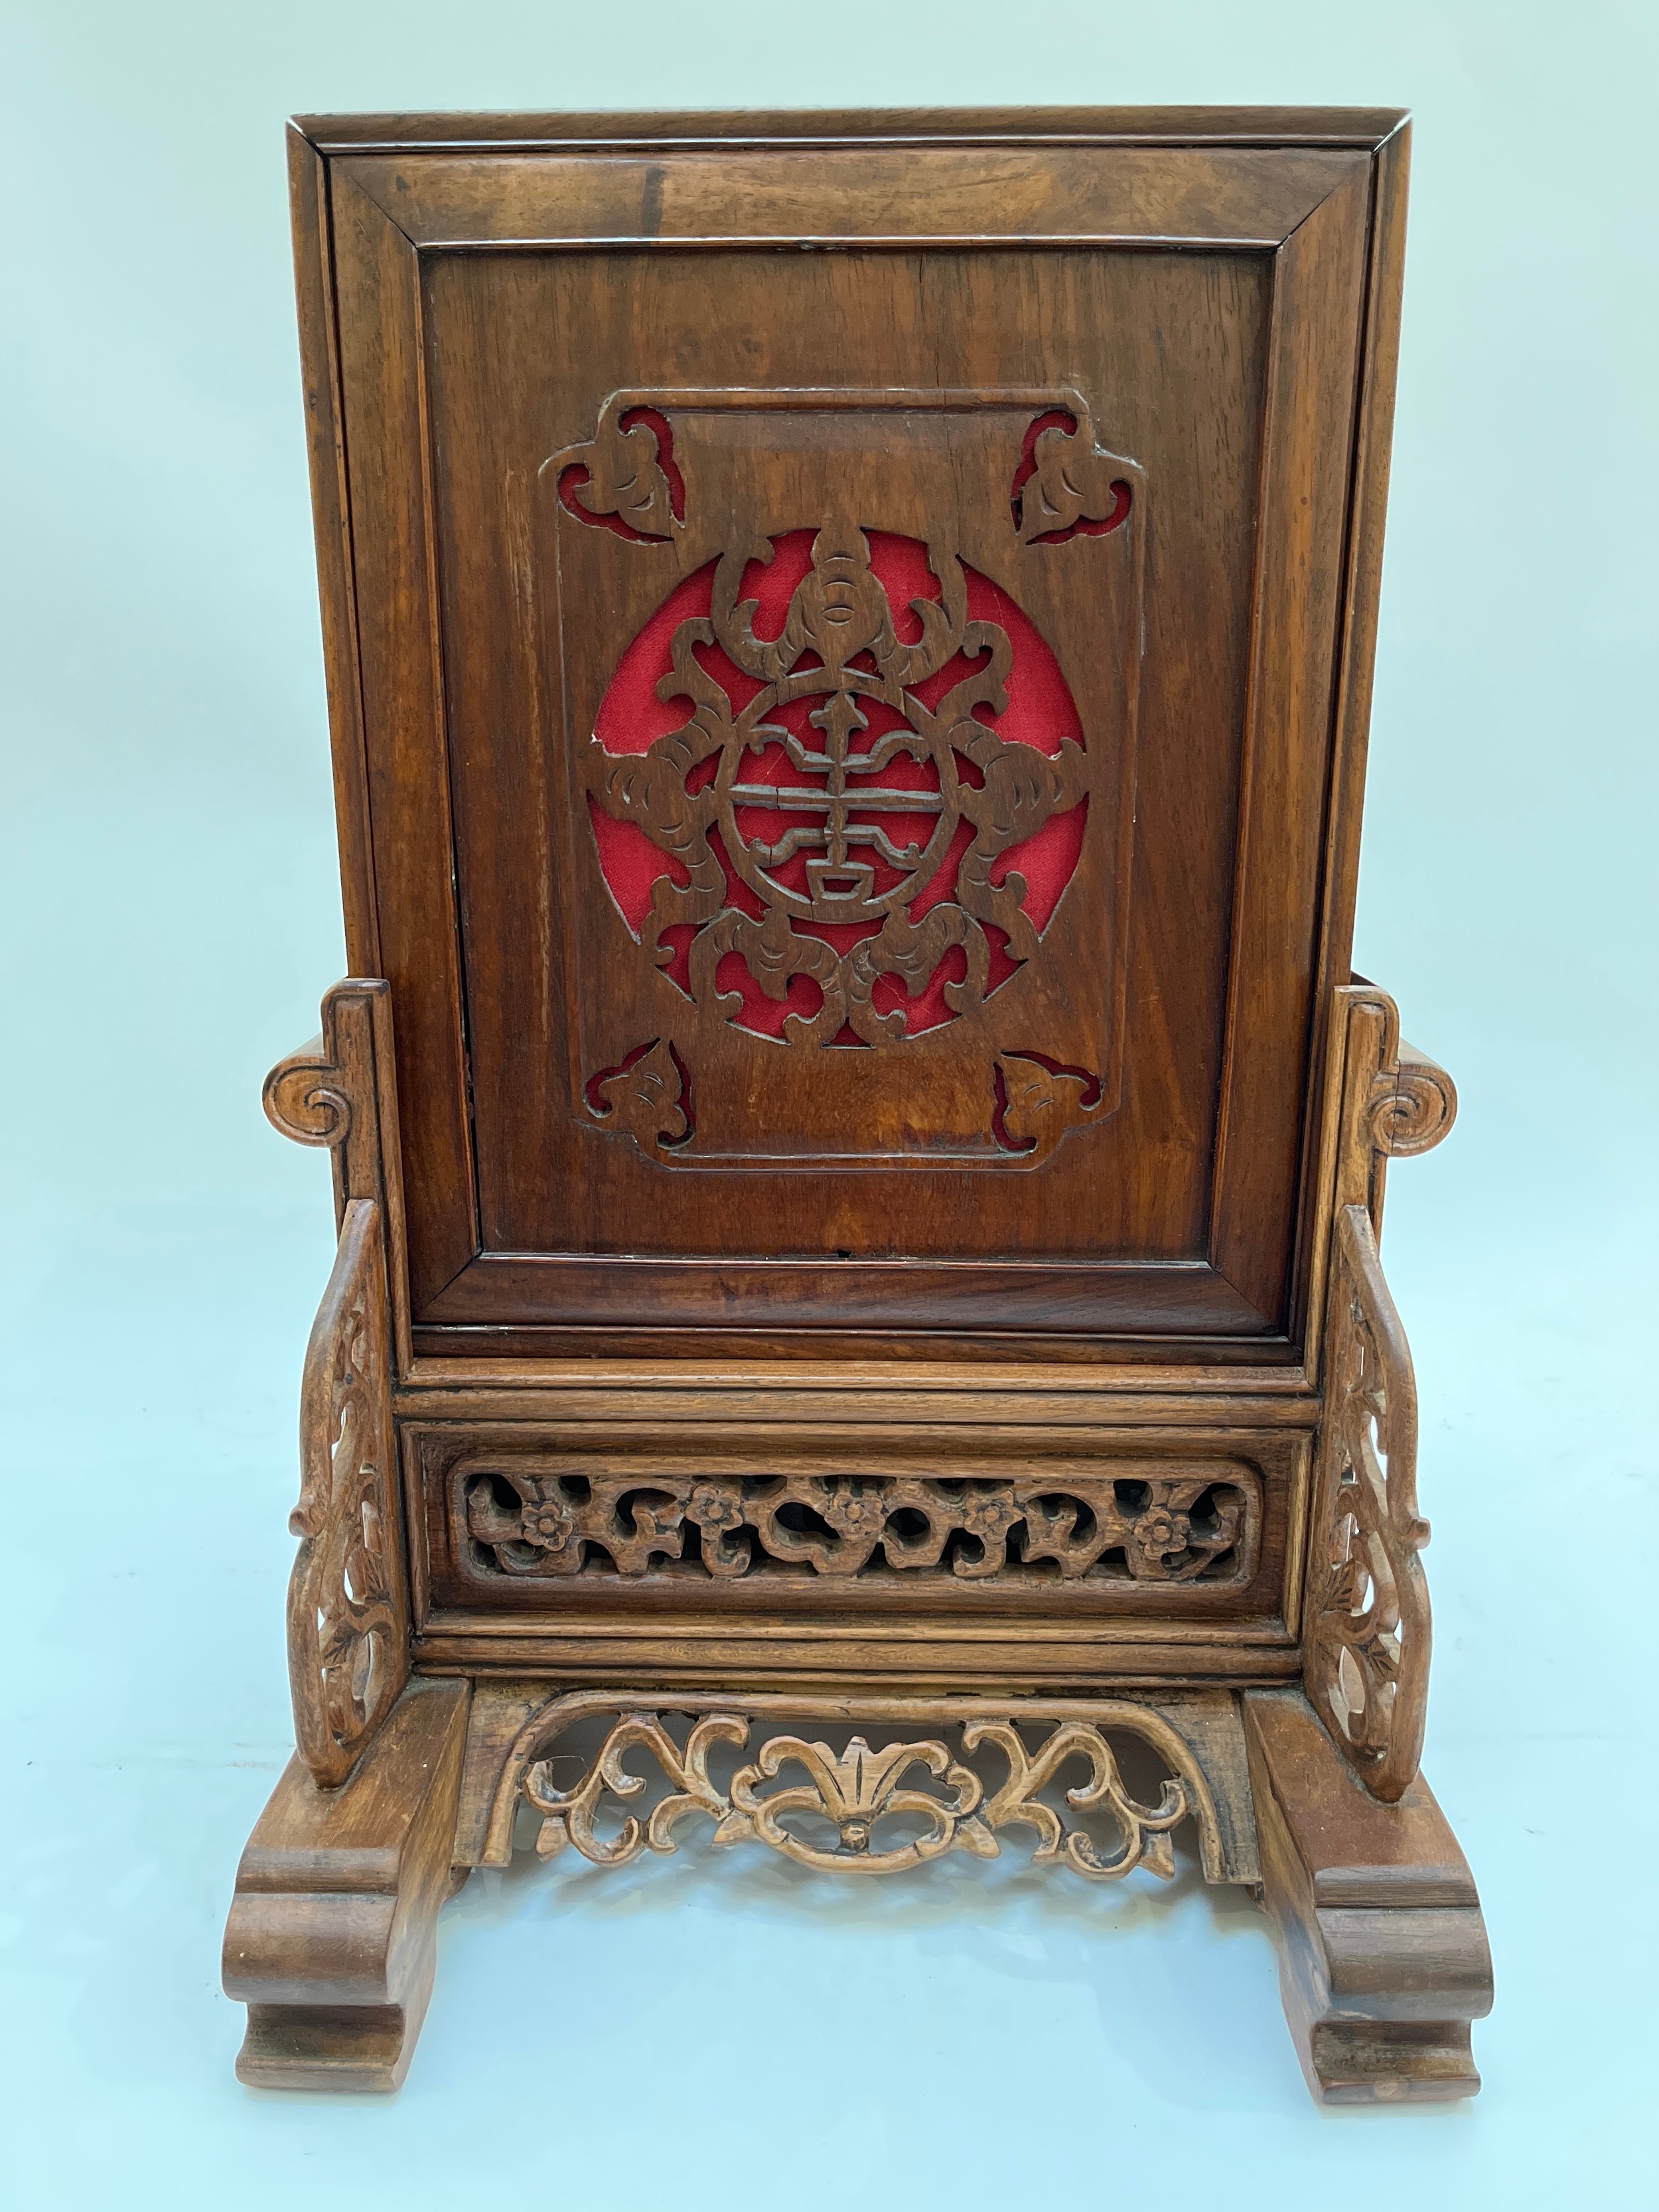 A late 19th Century Chinese mantel clock, double fusee movement, brass movement with crown wheel - Image 4 of 6